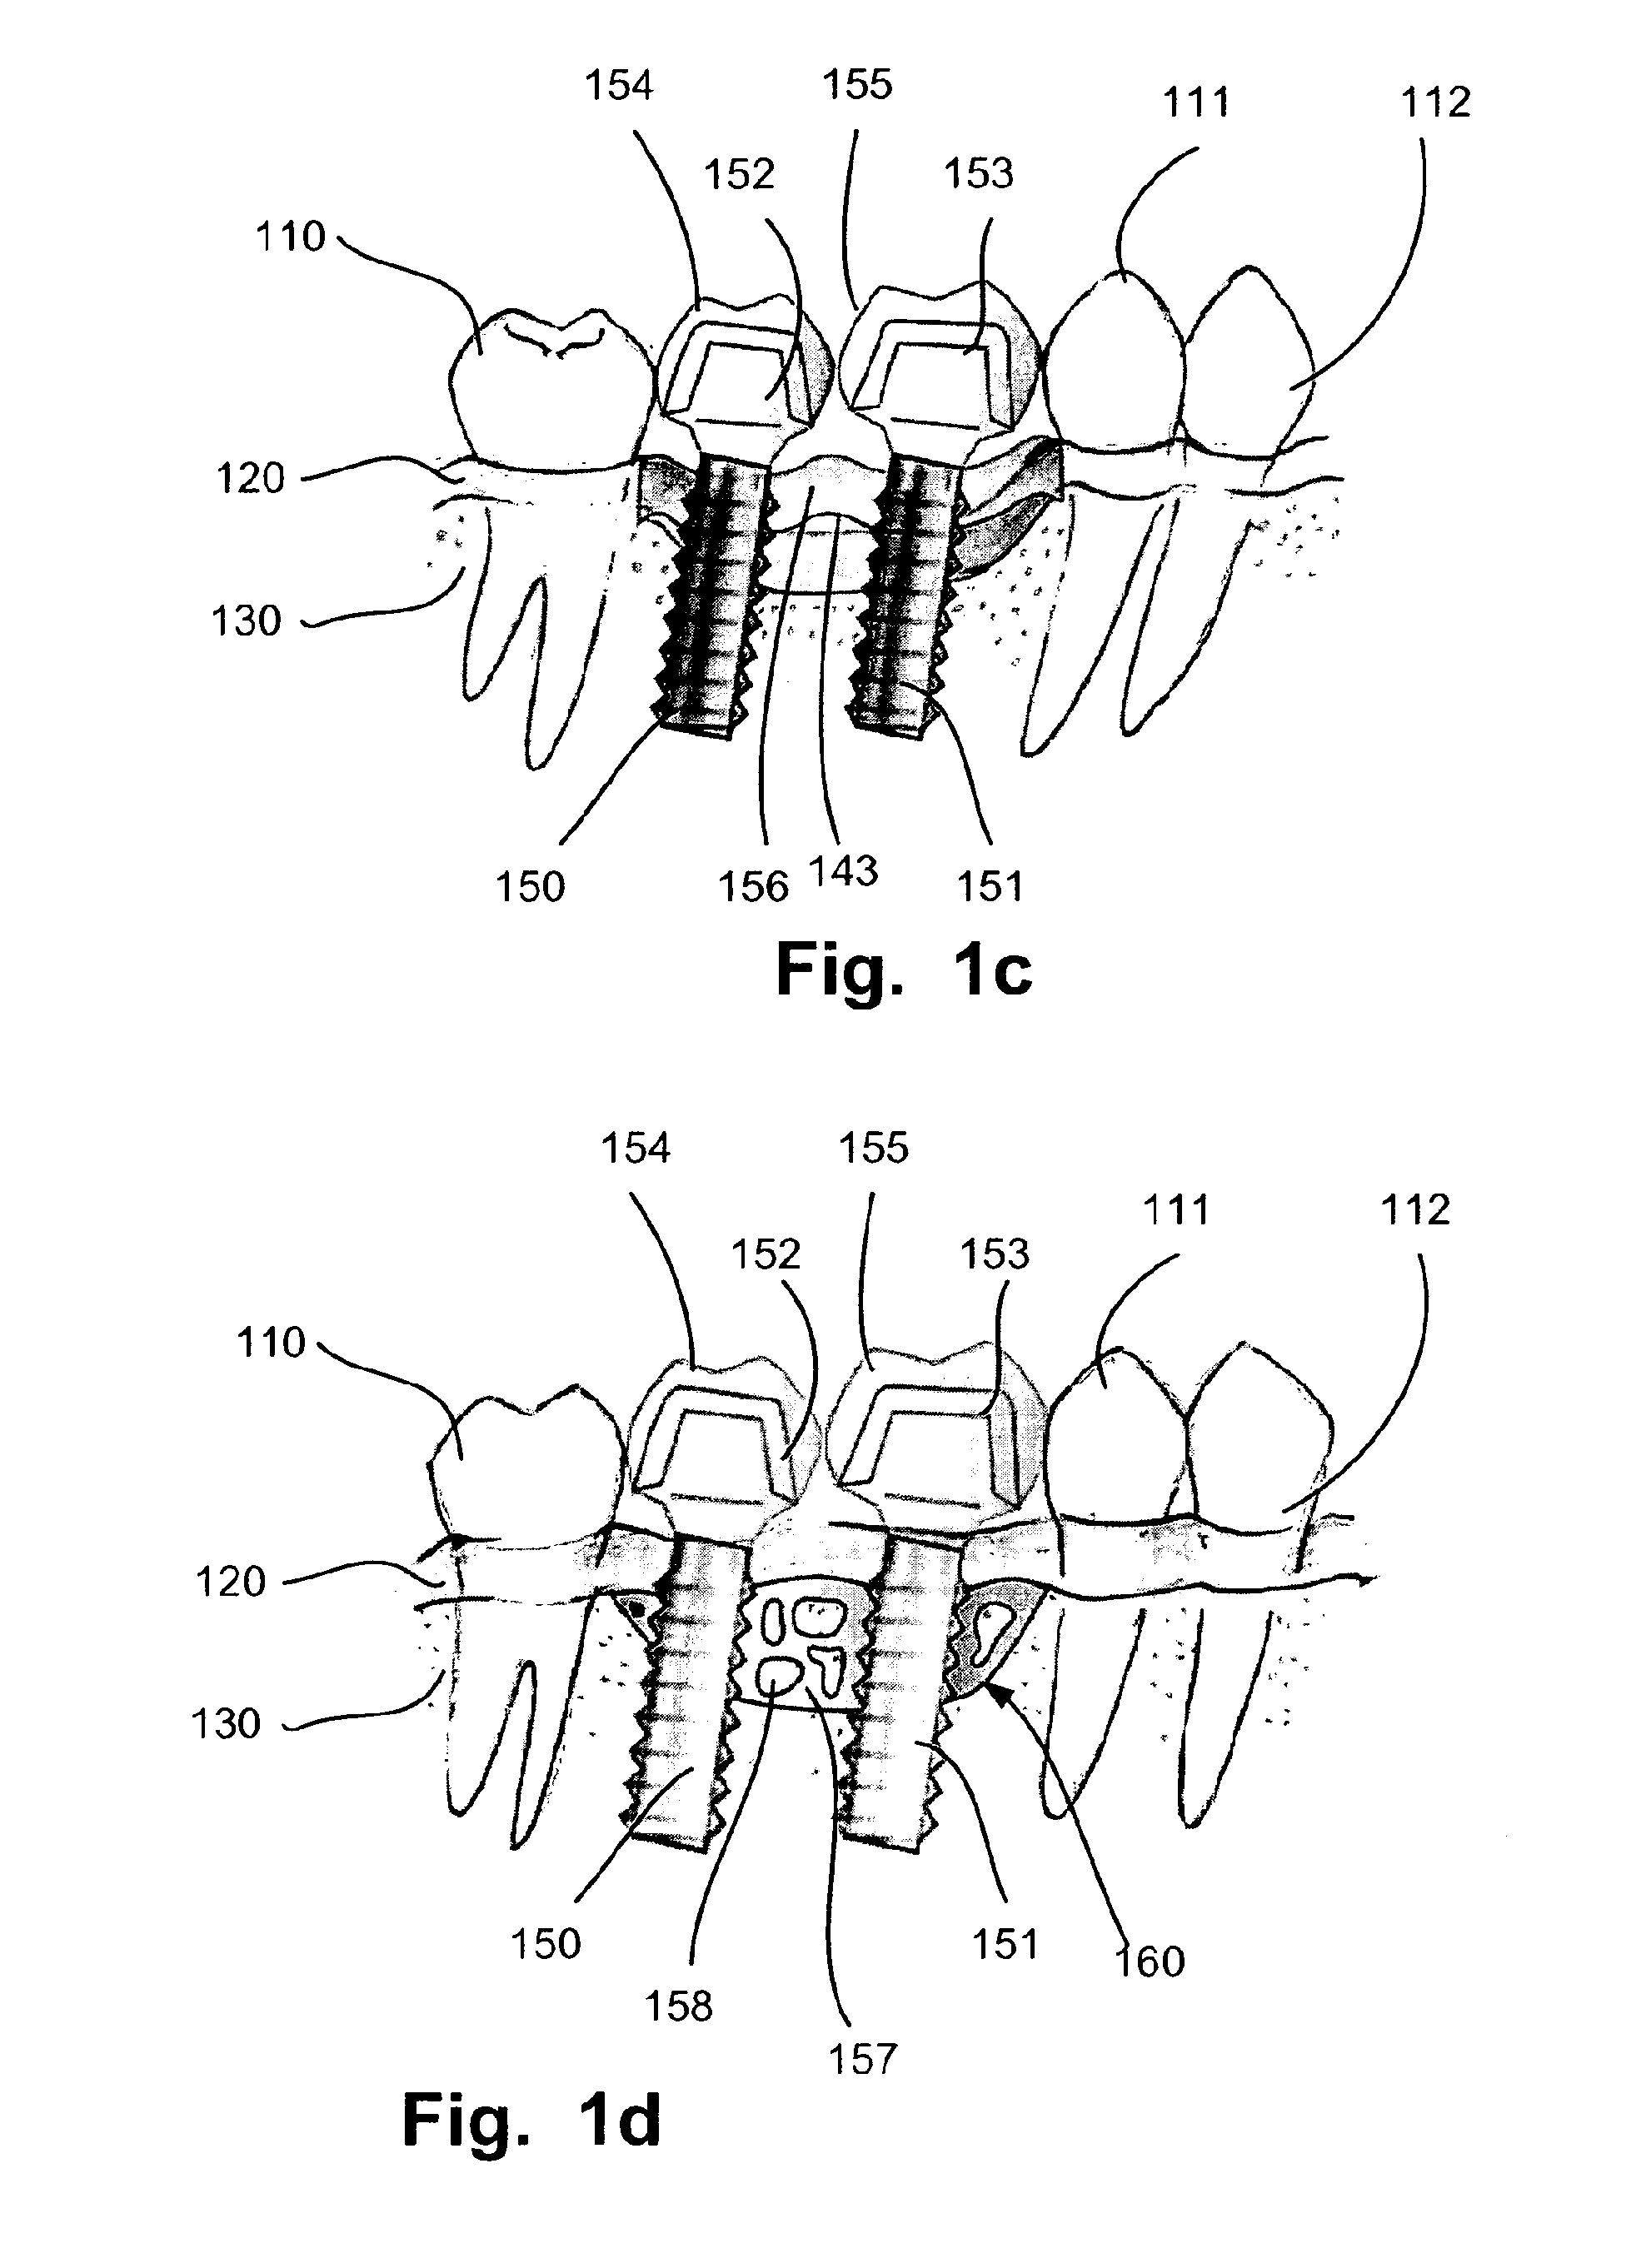 Computer implemented planning and providing of mass customized bone structure